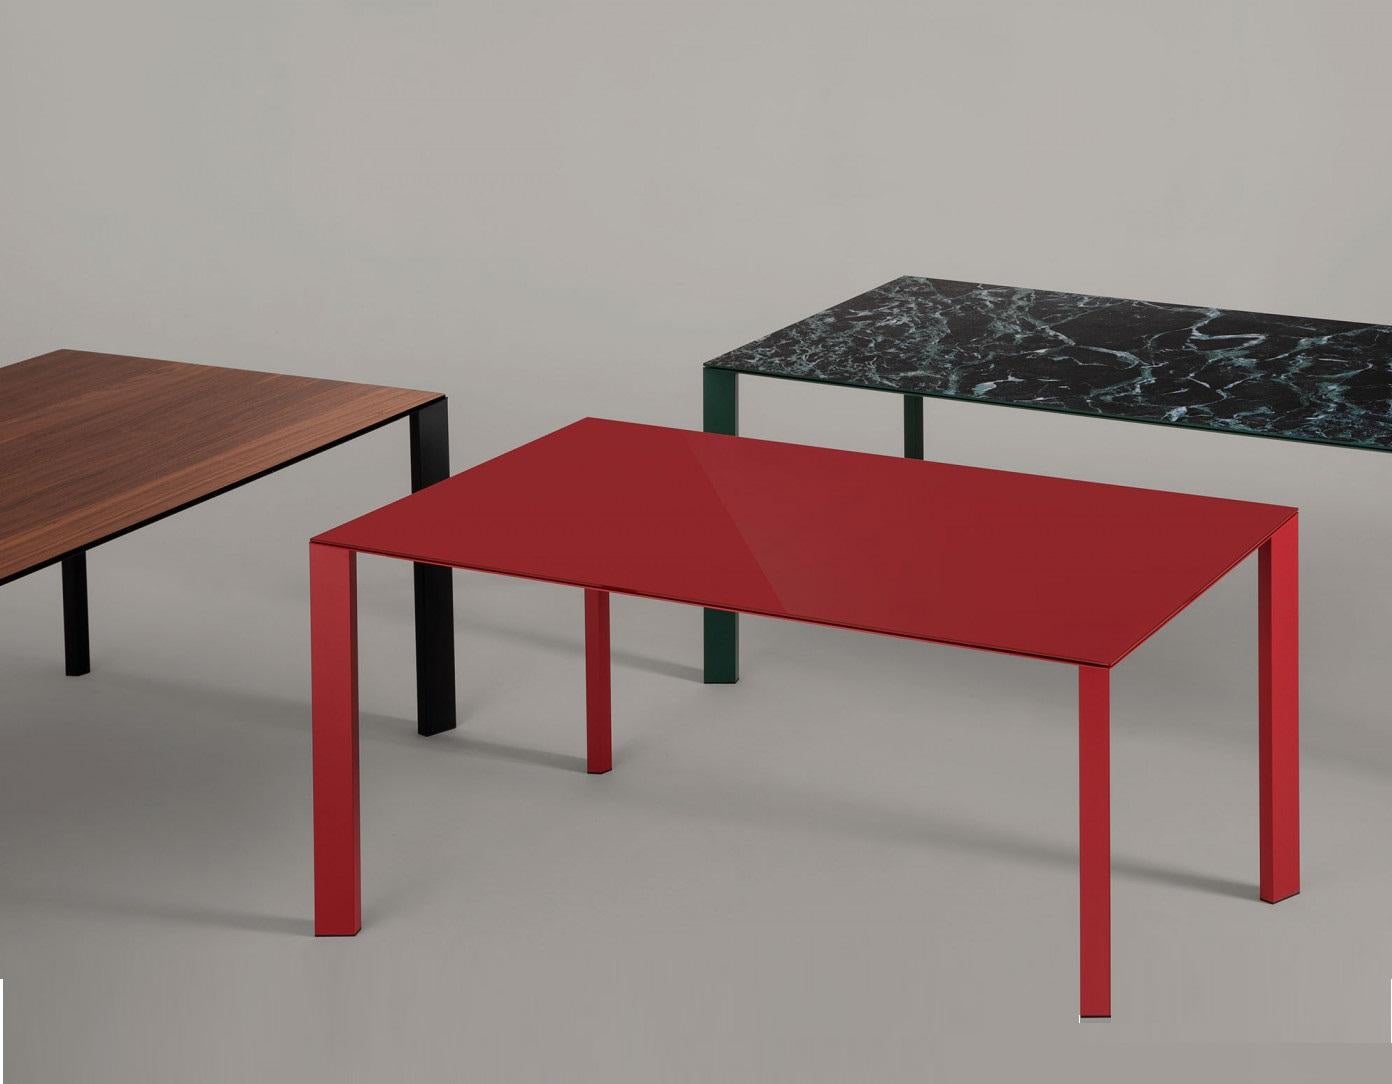 Indoor and outdoor dining table with lacquered metal structure. Glass top with 1/4 inch. thickness. 
Priced in pictured martials:
Cherry red lacquered frame with Cat. A cherry painted glass top. 
Additional charge for glass Cat. B & C
